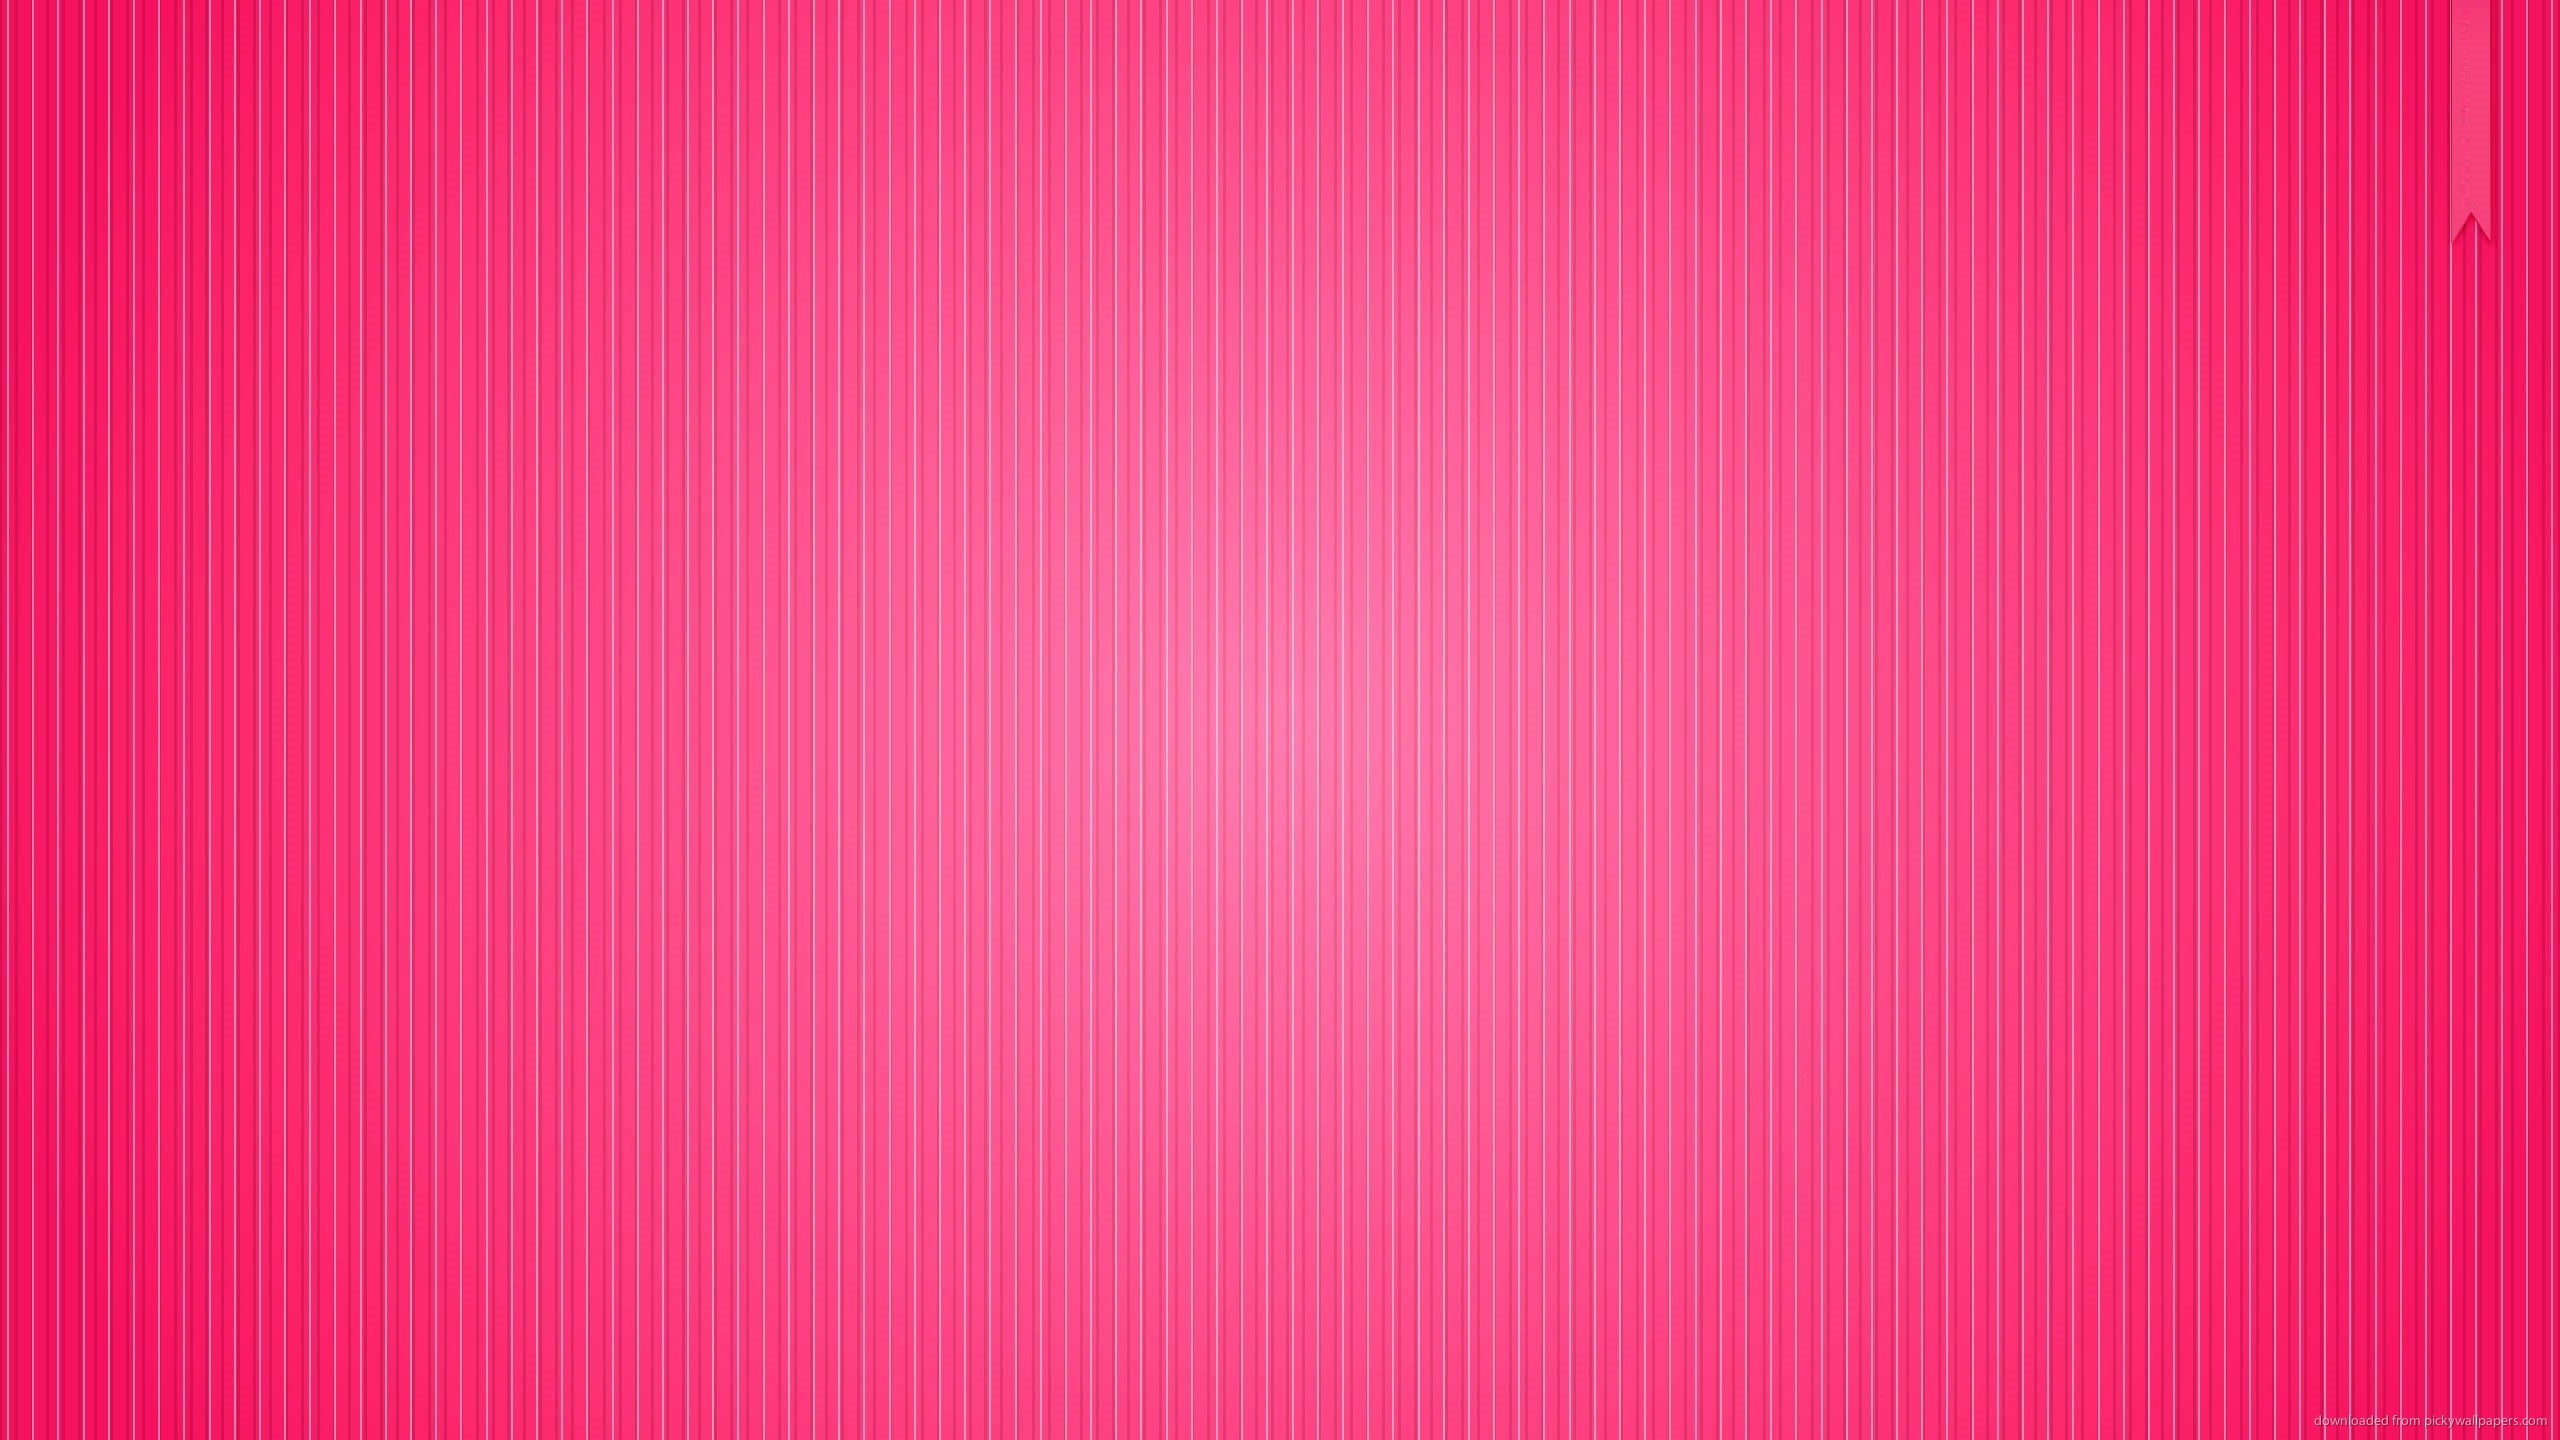 2560x1440 Valentine's Day Pink Striped Background for.